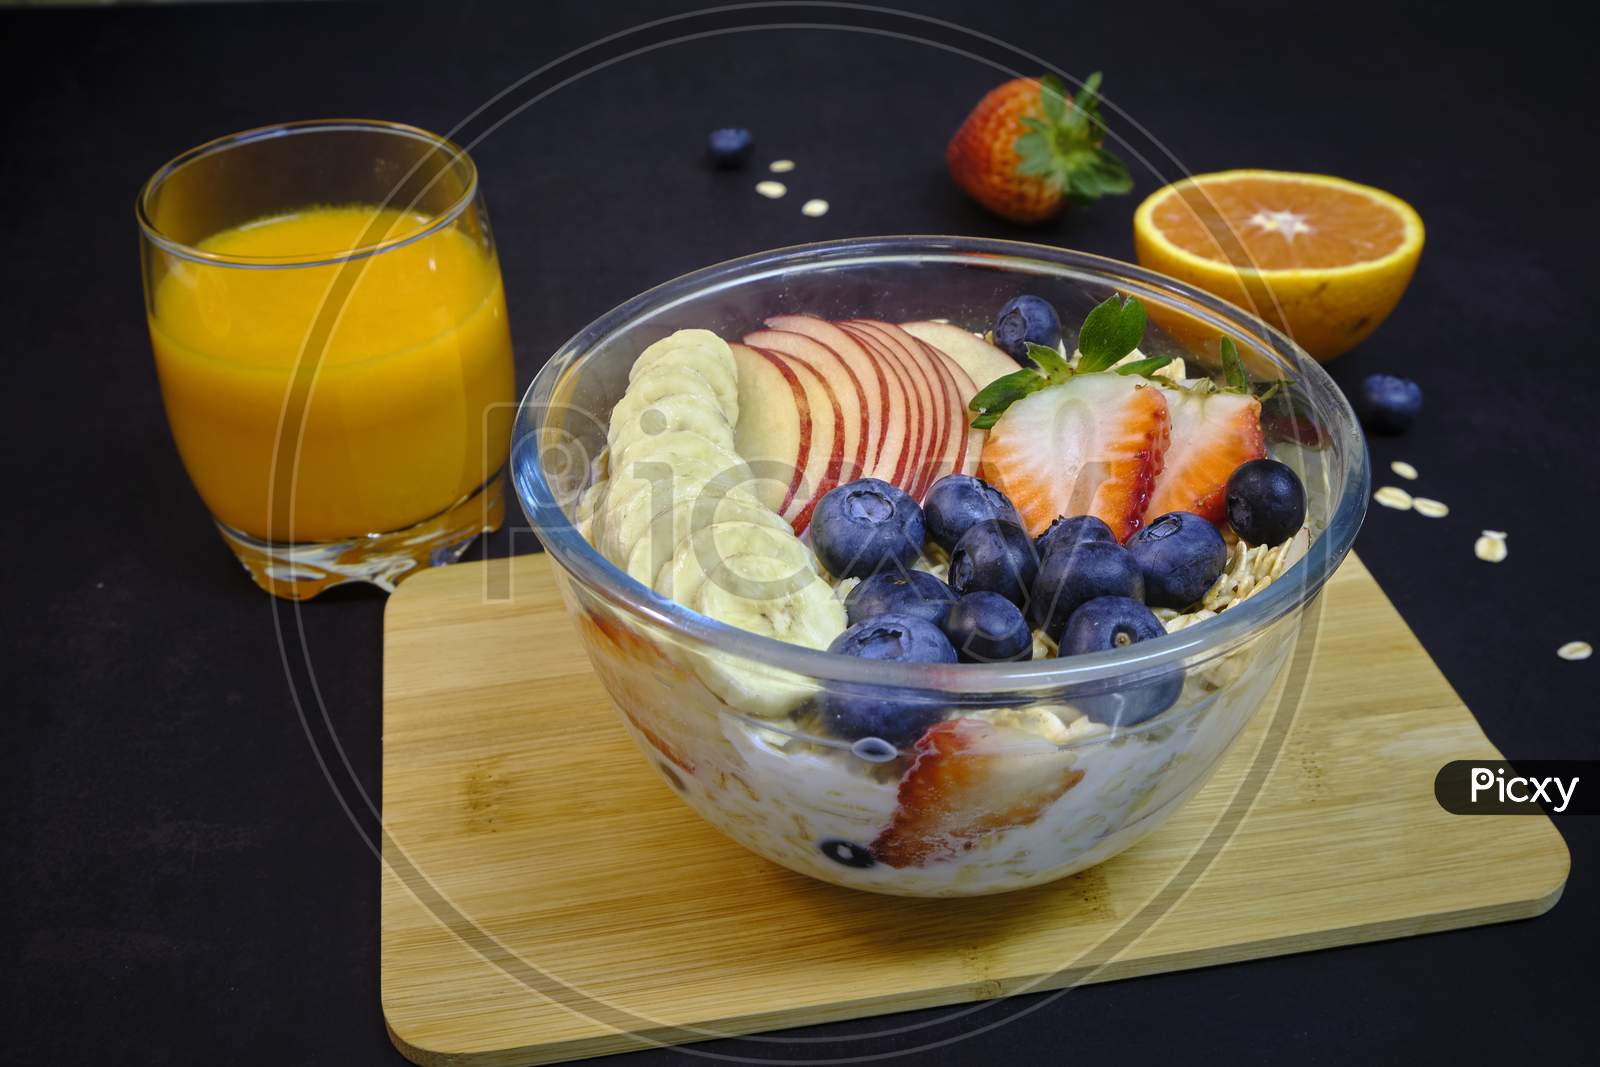 Healthy Breakfast With Fresh Fruit Cocktails. Bowl Of Colorful Fruits And Oats.